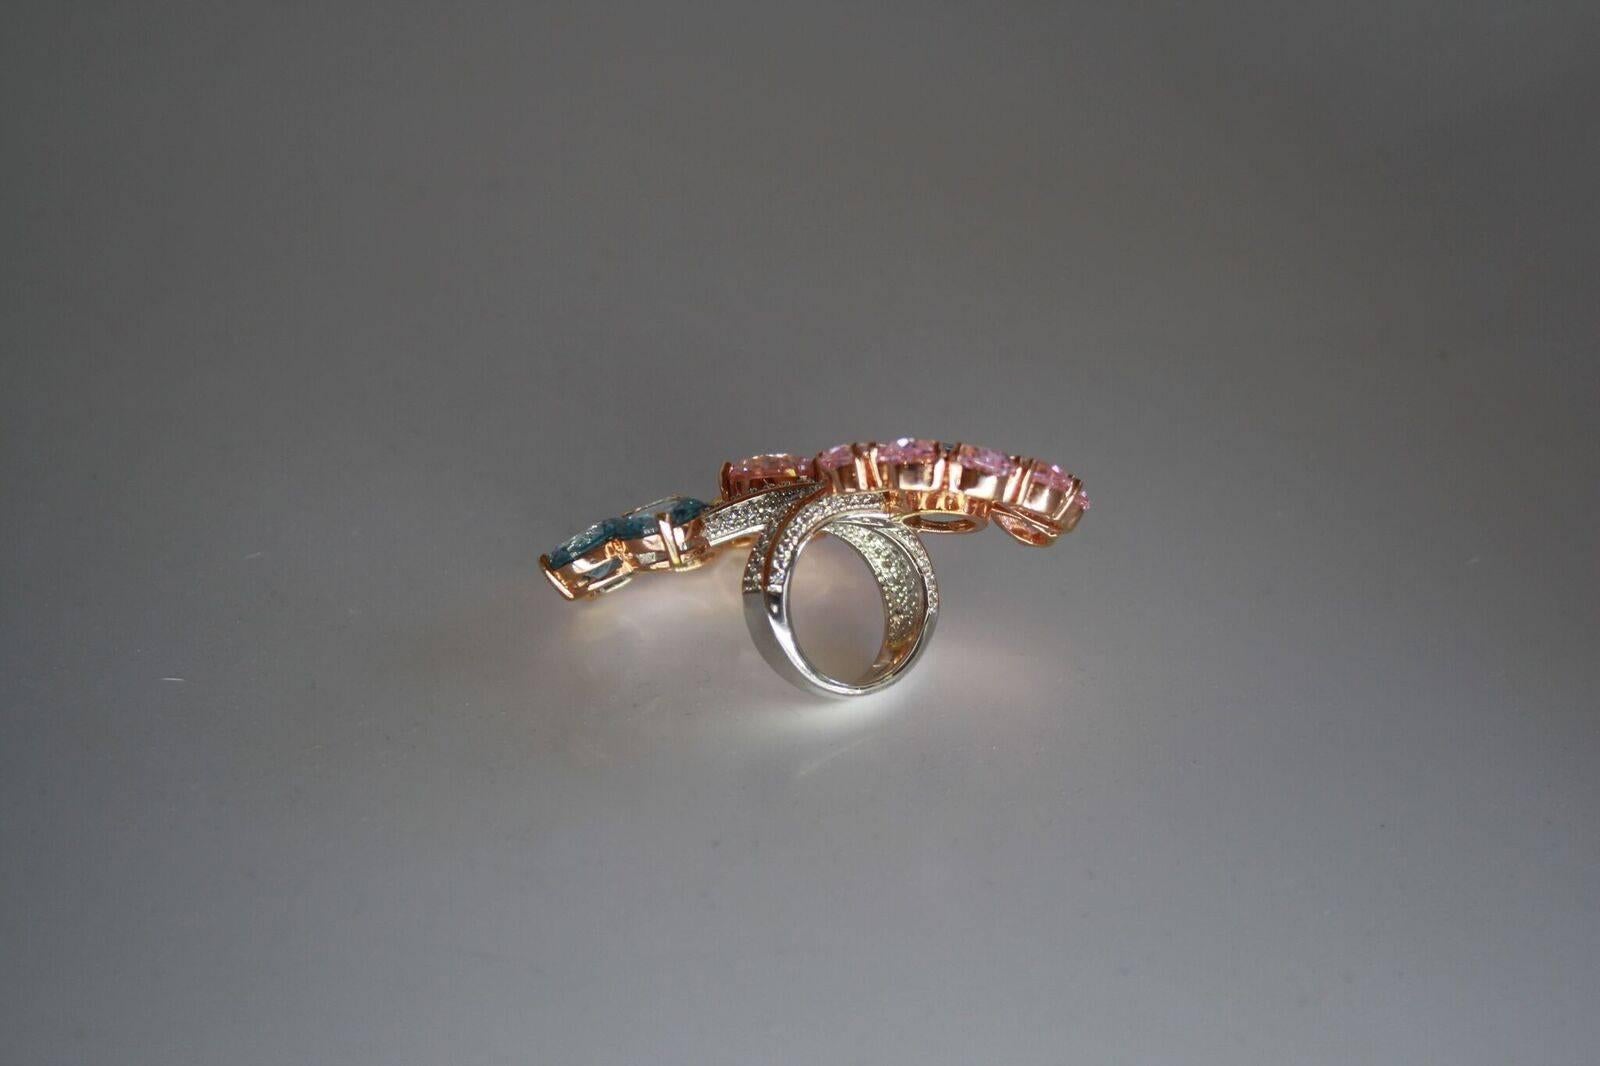 An extravagant cocktail ring made with clear, blue, pink, and yellow Zircon from Italian brand Ultima Edizione. Size 7. 